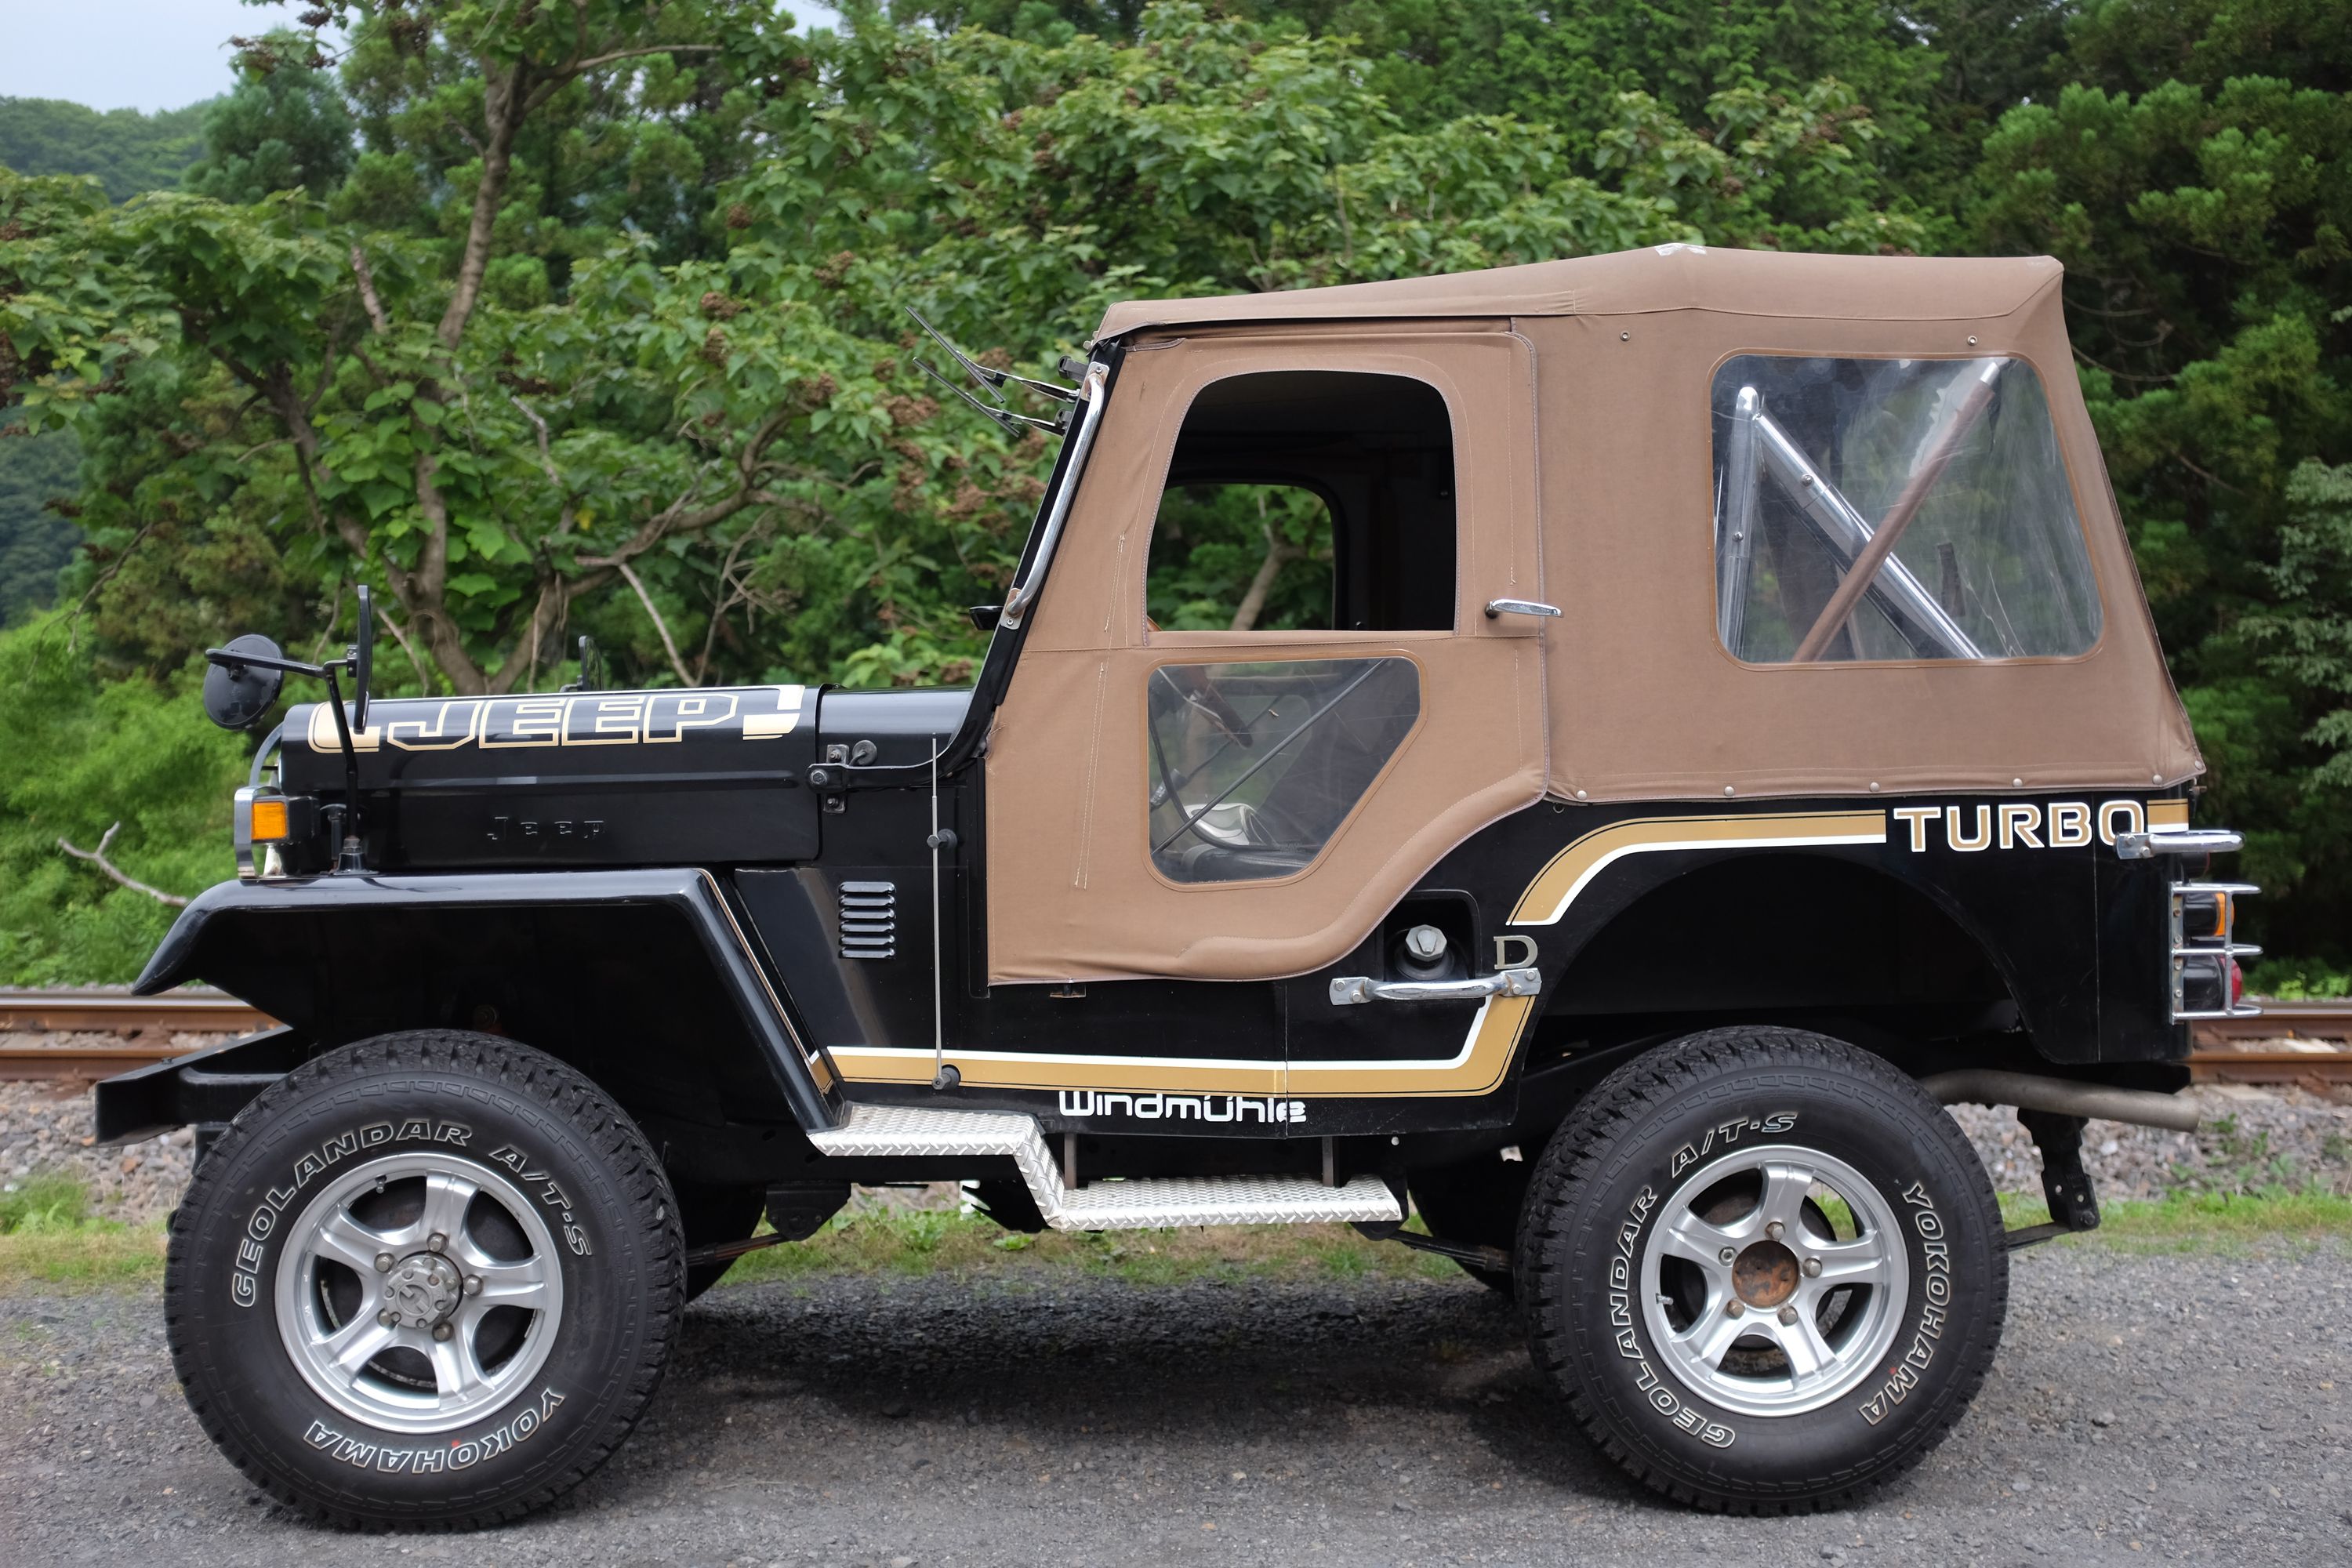 A black and tan Jeep by the railroad tracks.